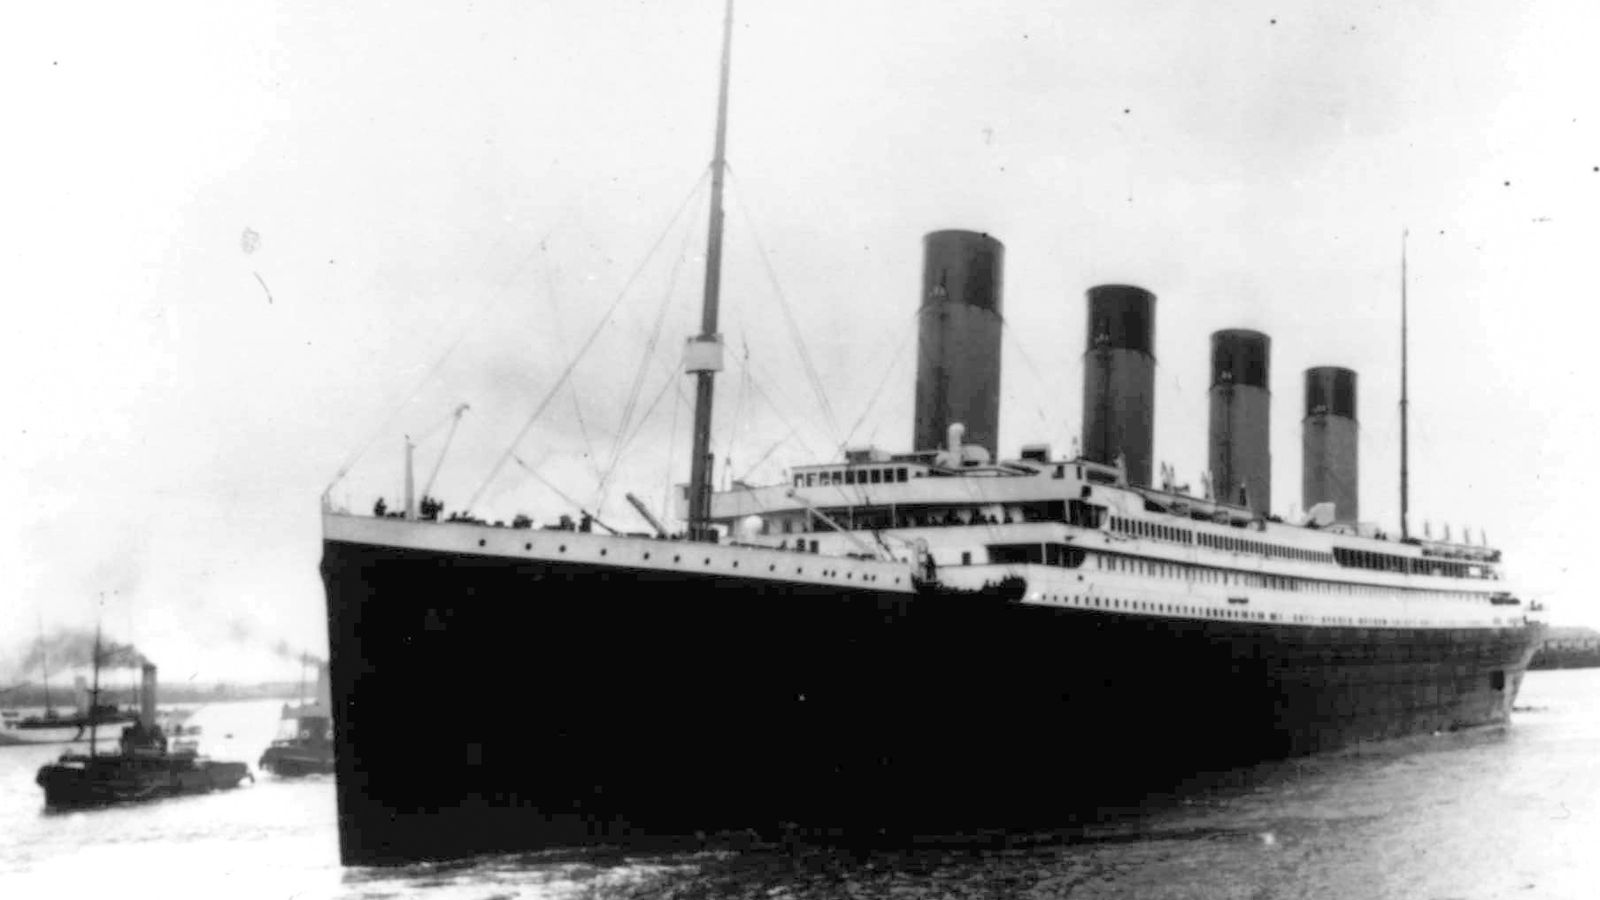 gold watch recovered from body of richest man on the titanic to be auctioned